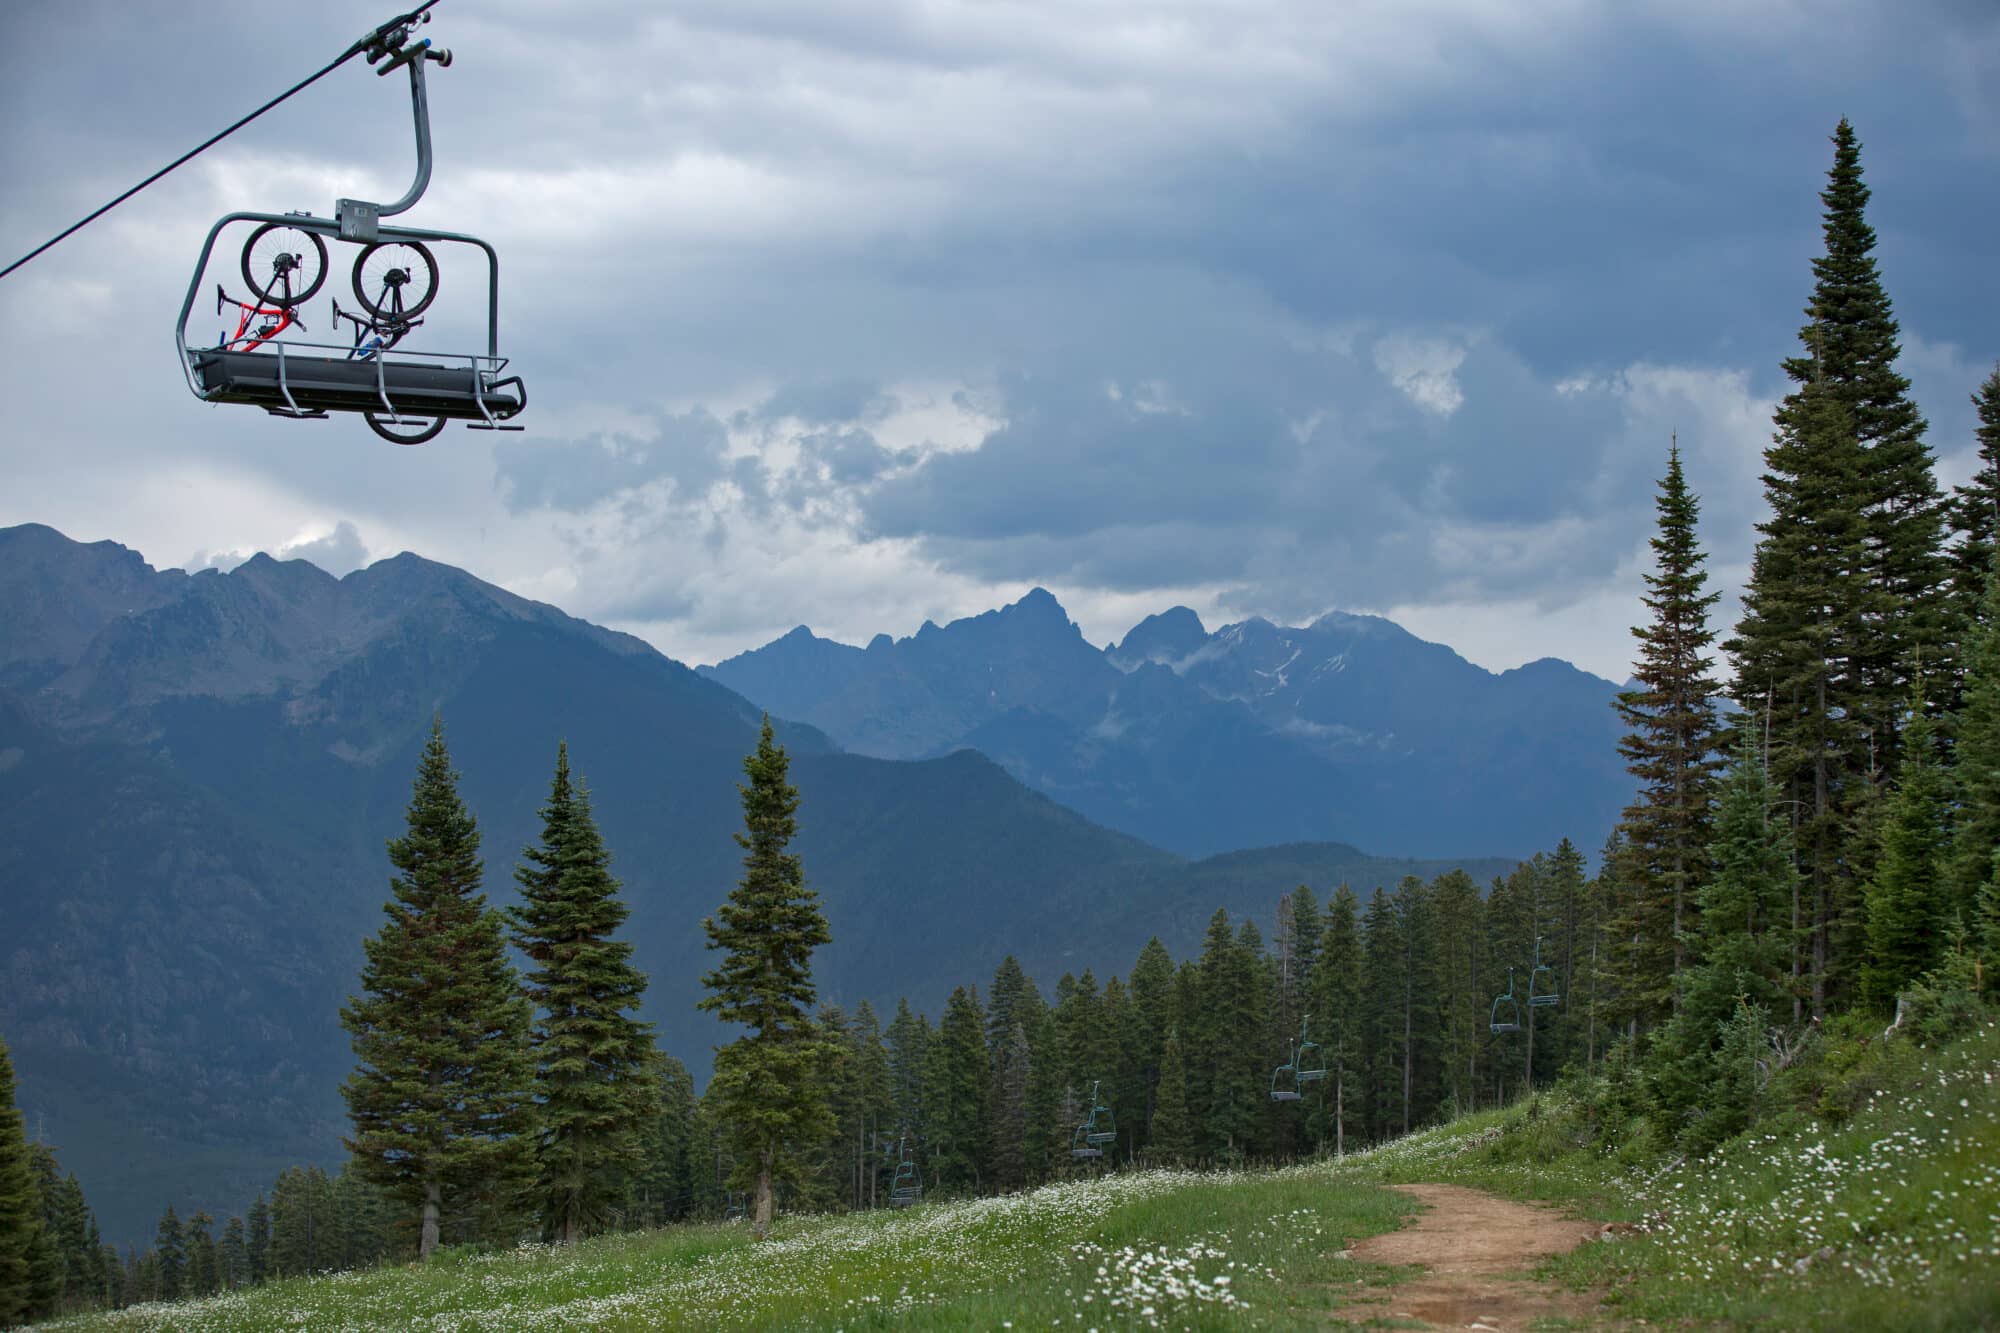 Mountain bikes hang on the mountain bike carrier hooks on the back of a chairlift